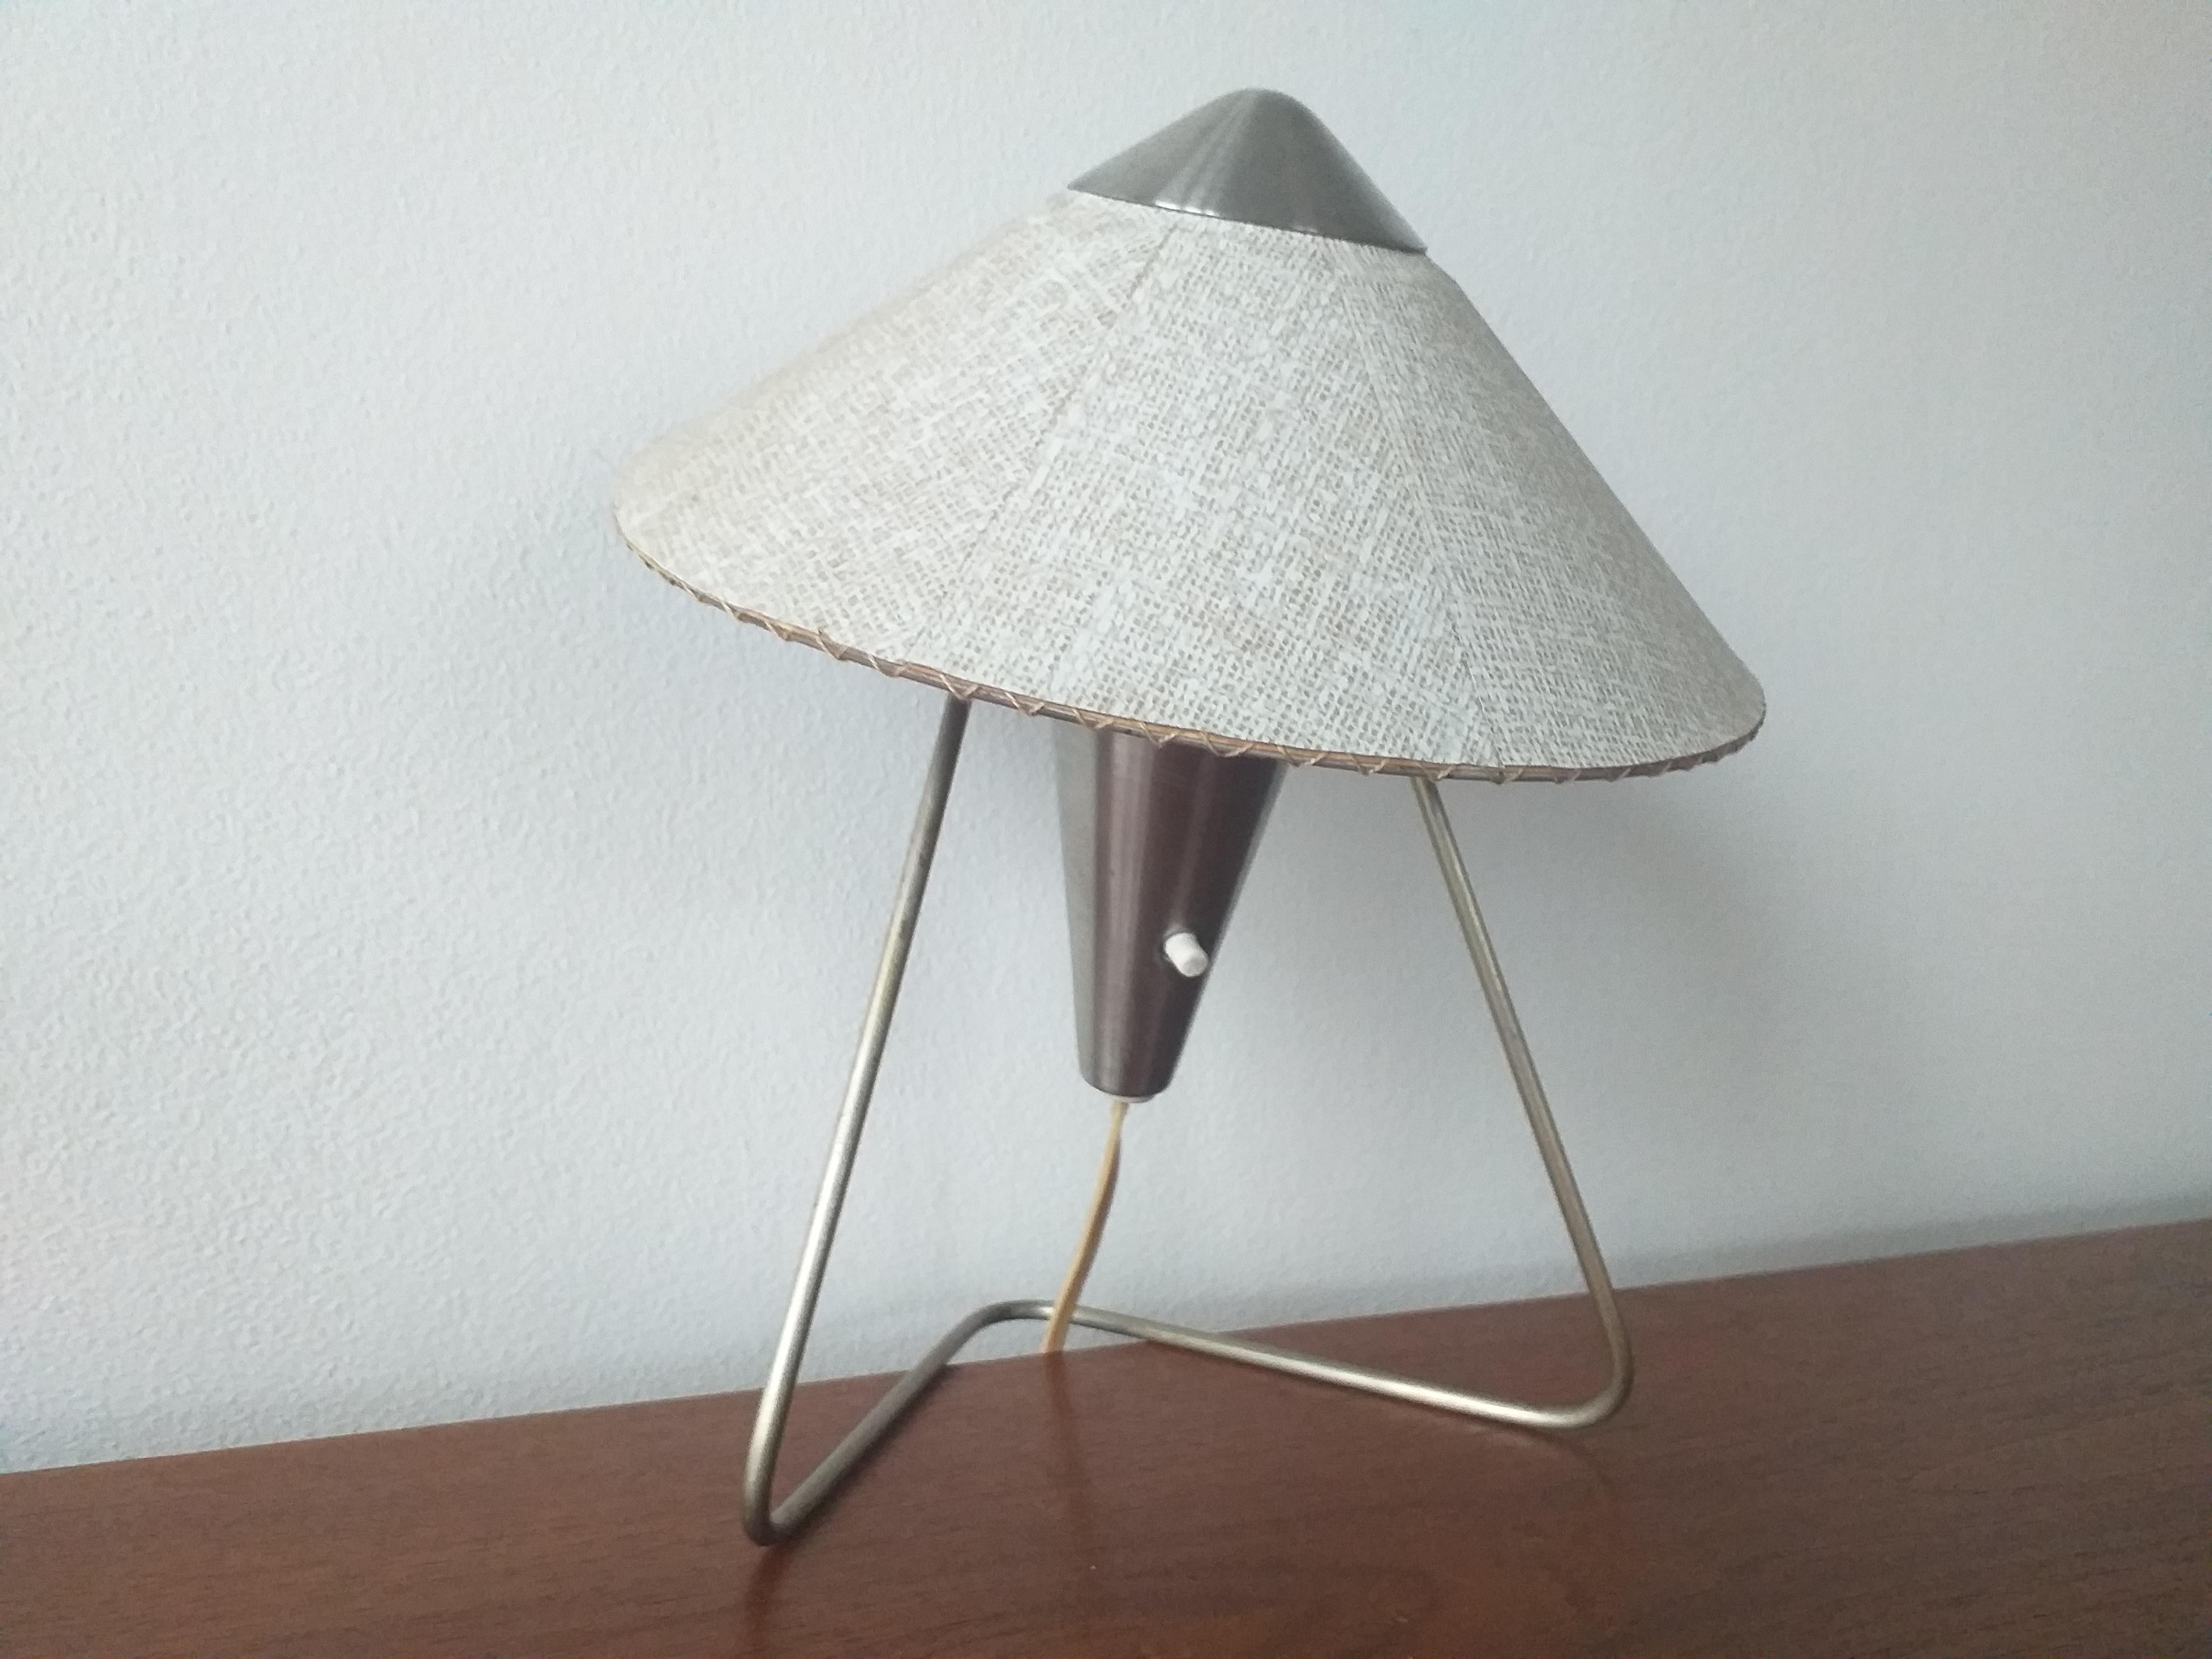 Metal Midcentury Table or Wall Lamp Designed by Helena Frantova, 1950s For Sale